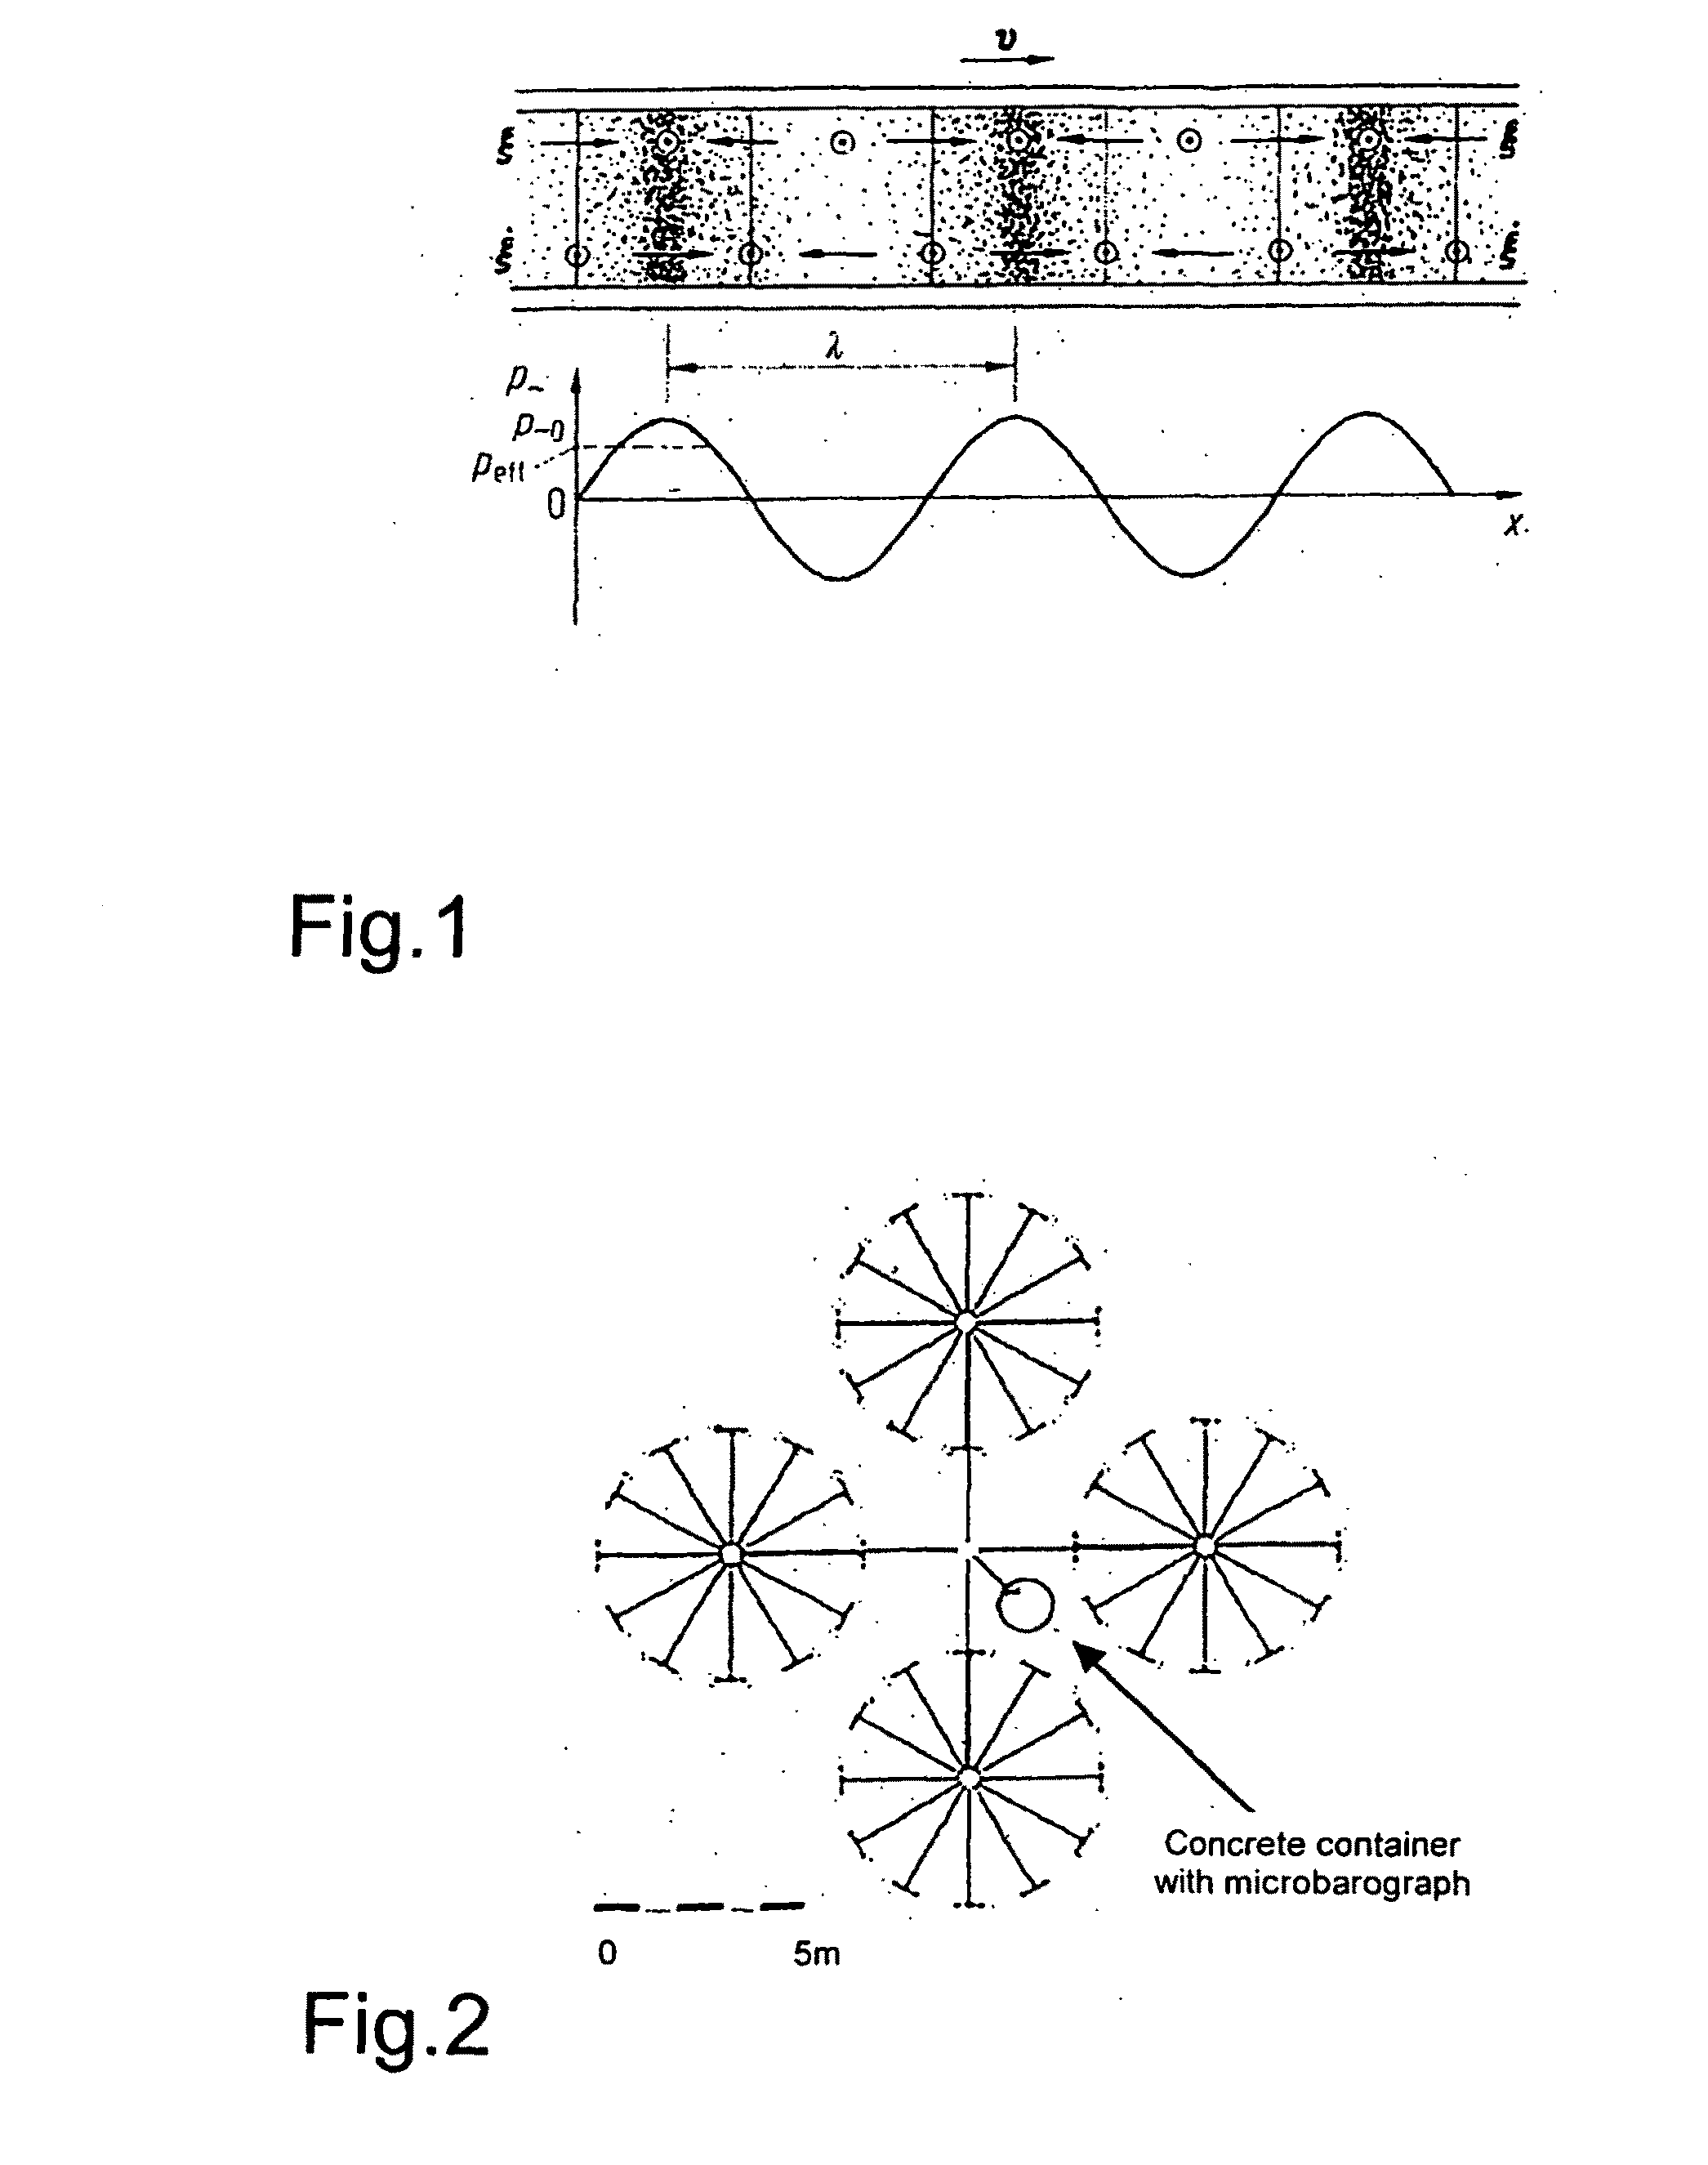 Method for Detecting of Geotectonic Signals Triggered by a Geotectonic Event